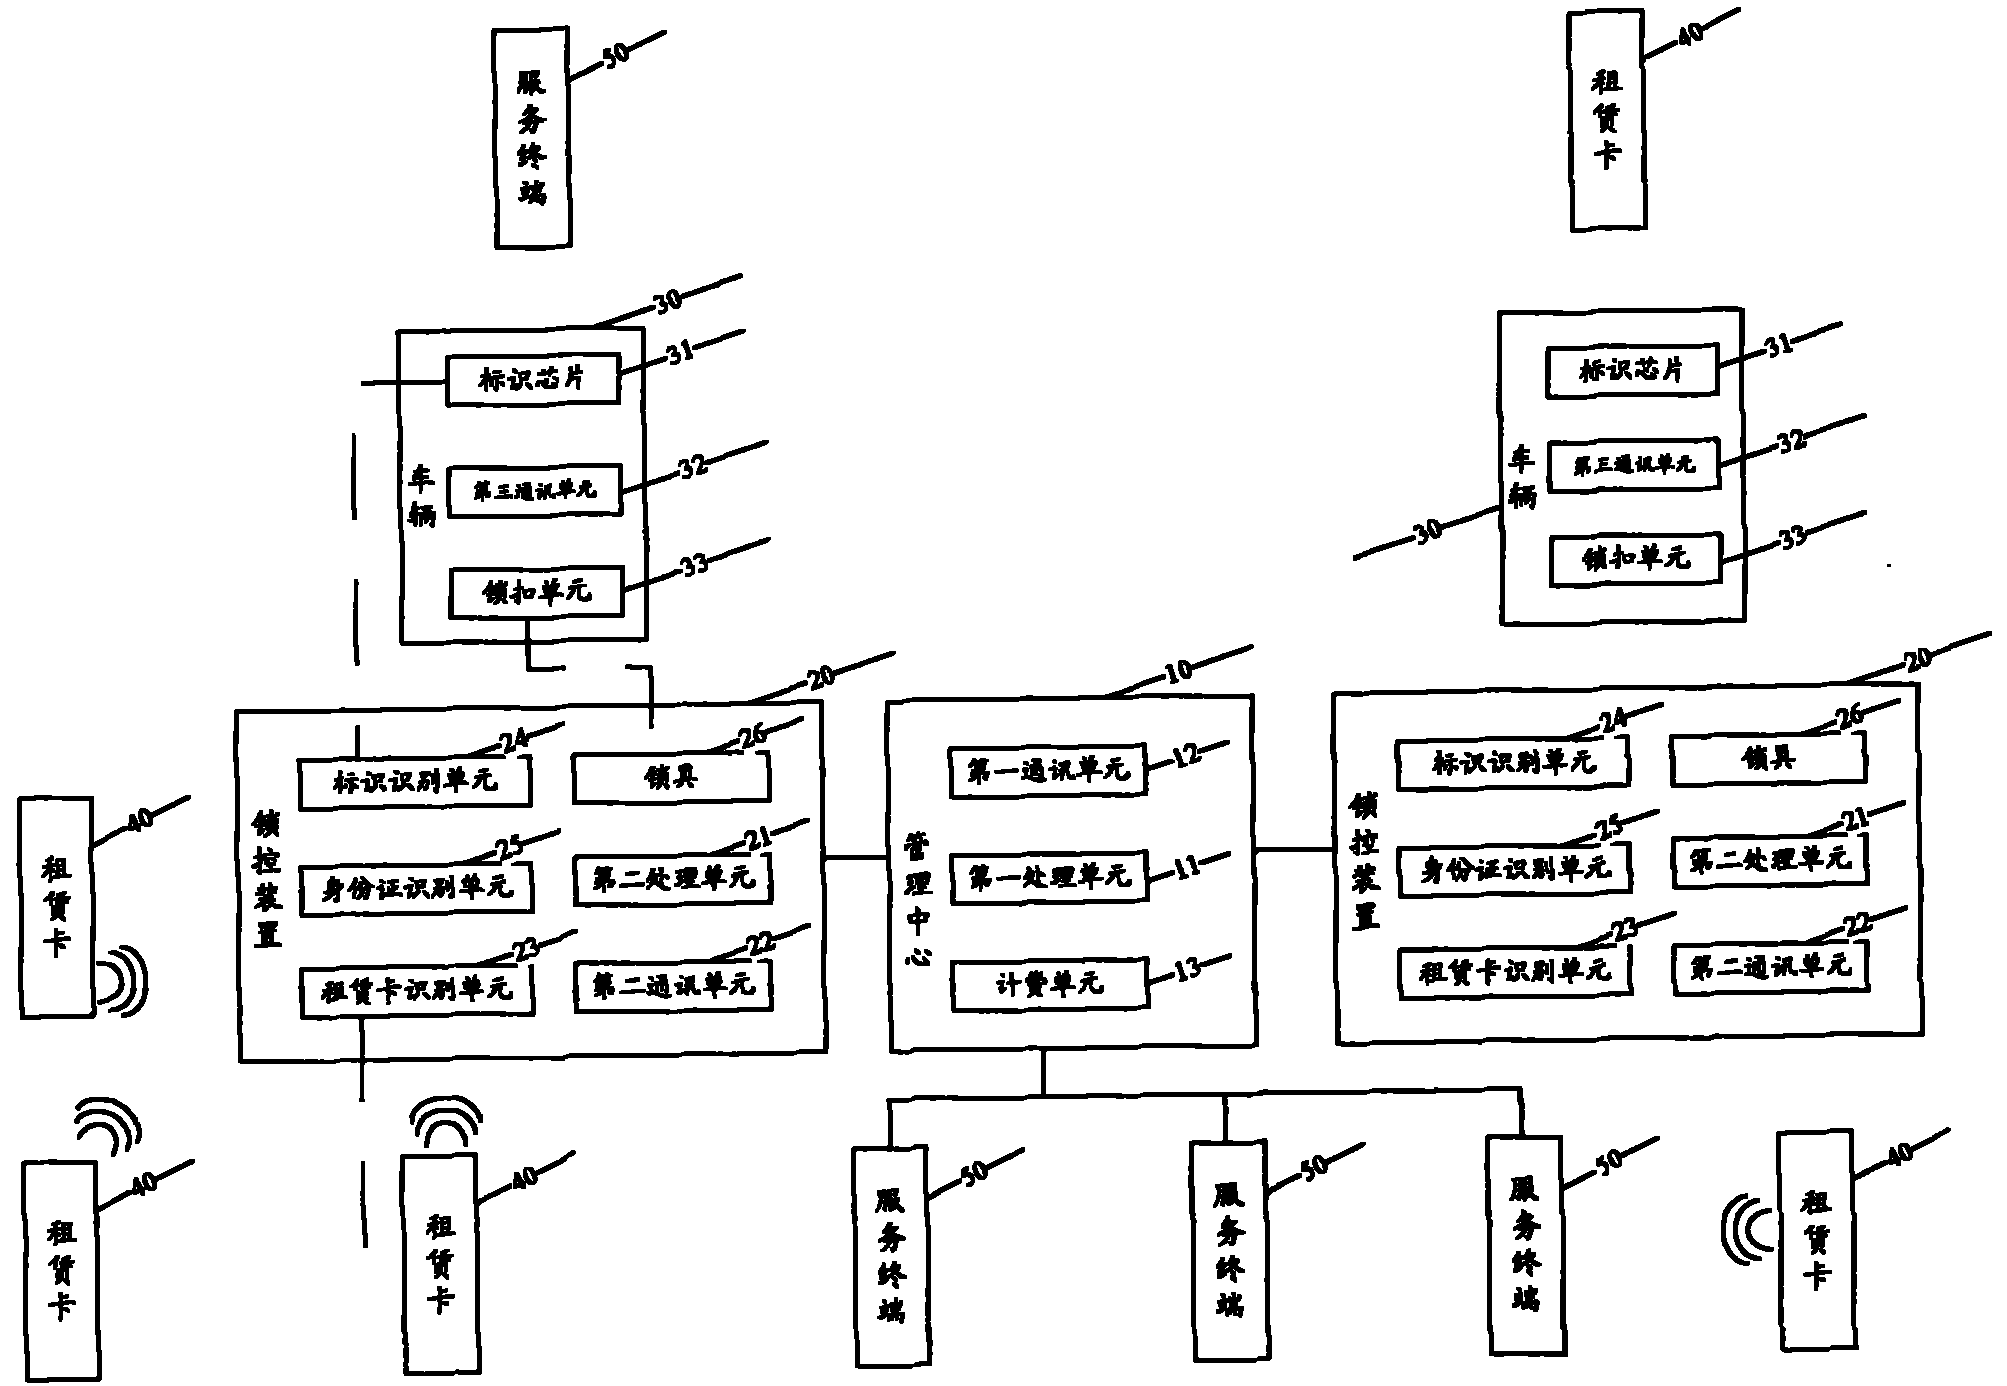 Vehicle renting control system and methods for renting and returning vehicles by using same